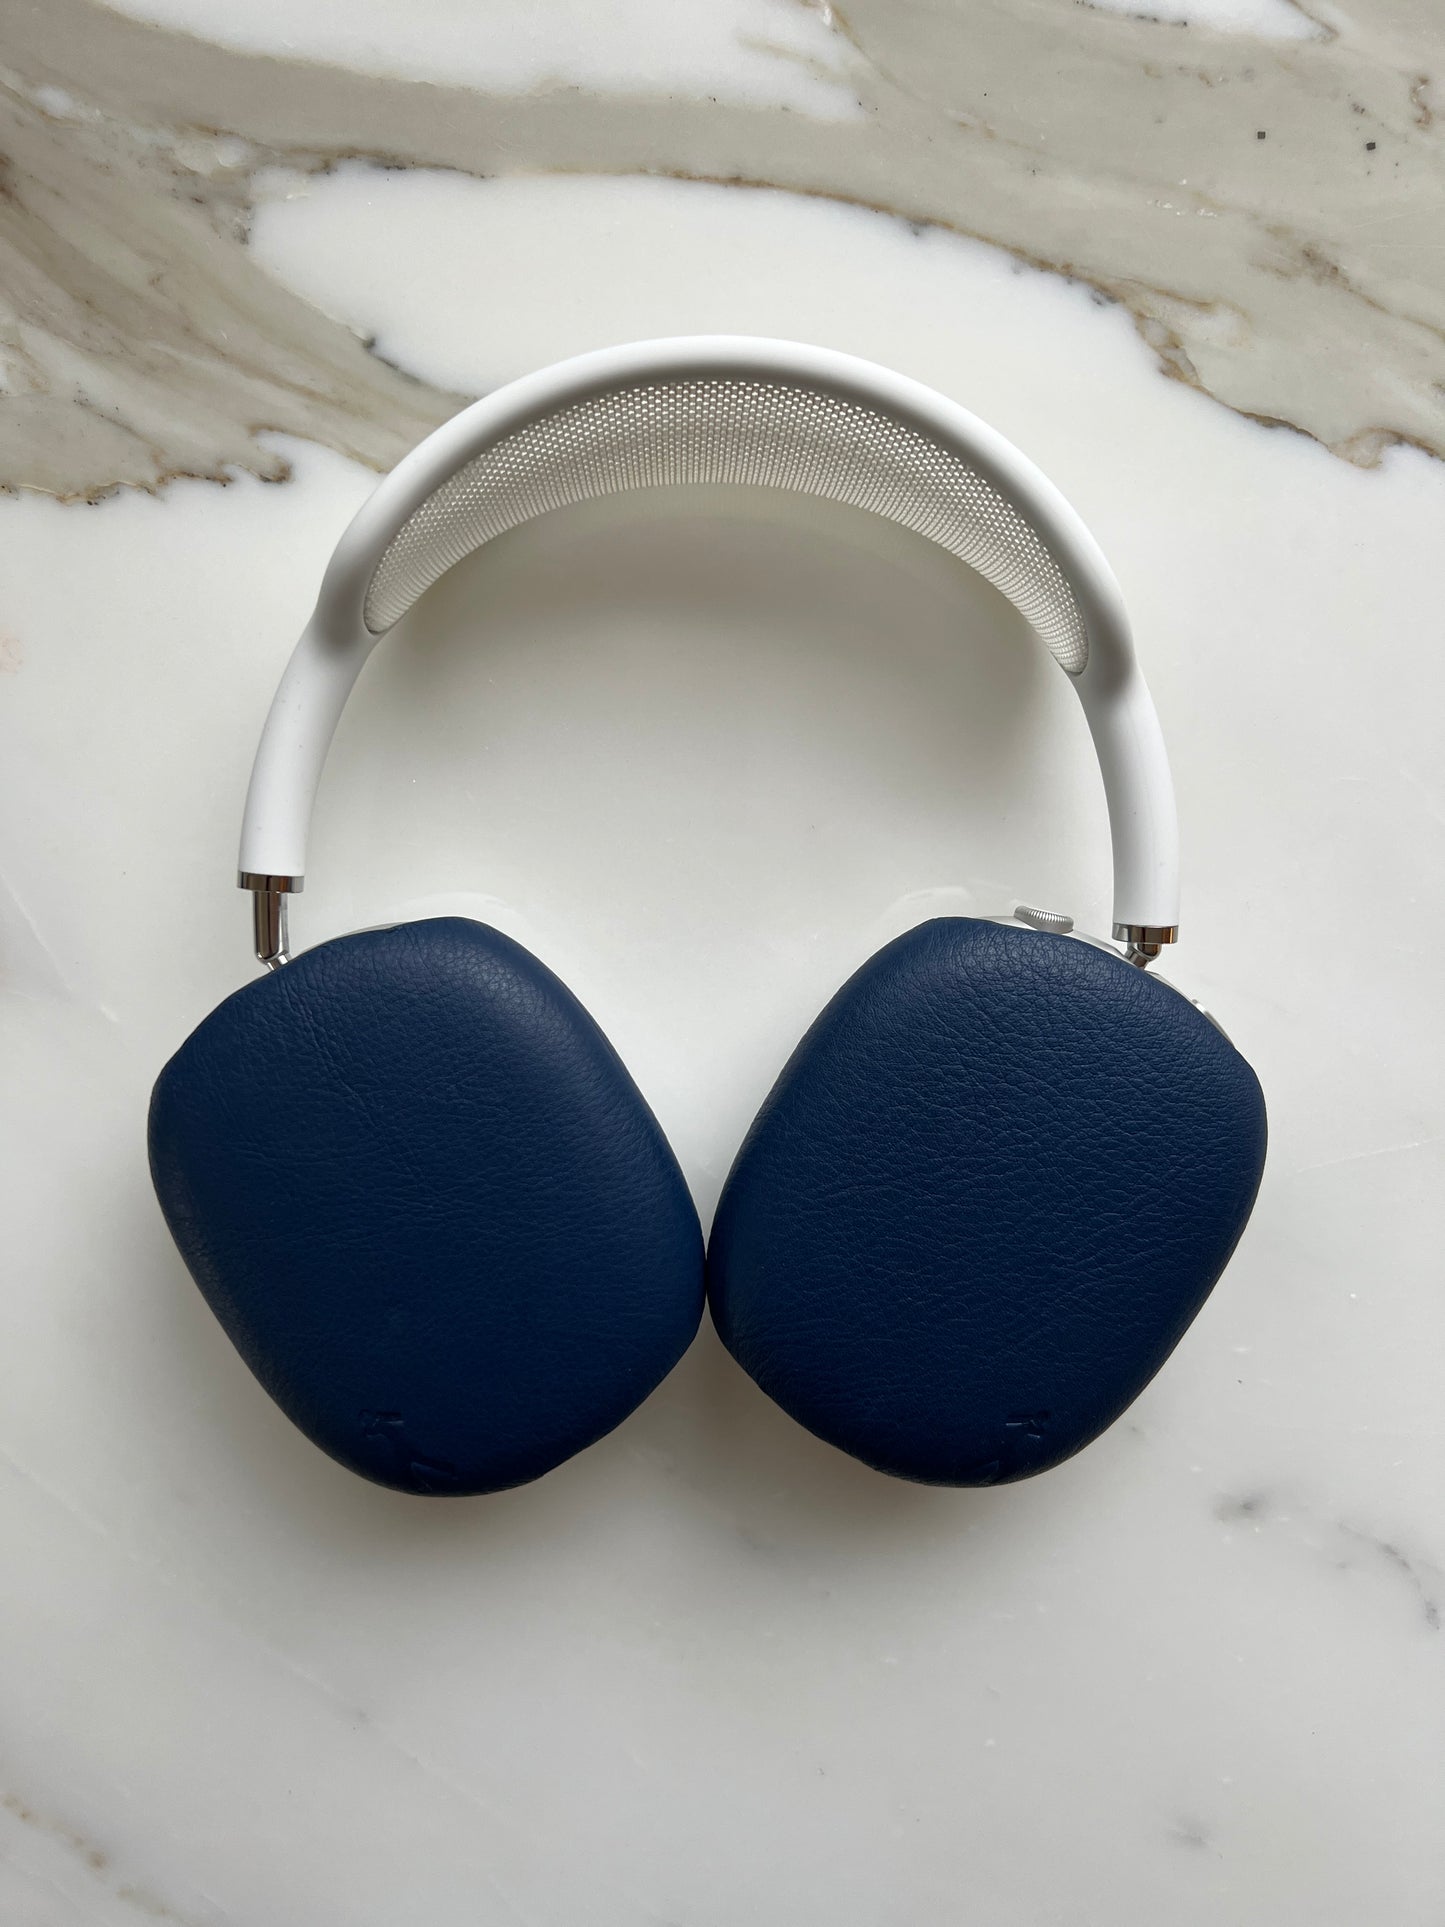 "Walkman" Genuine Leather Airpods Max Cover - Commuter Blue